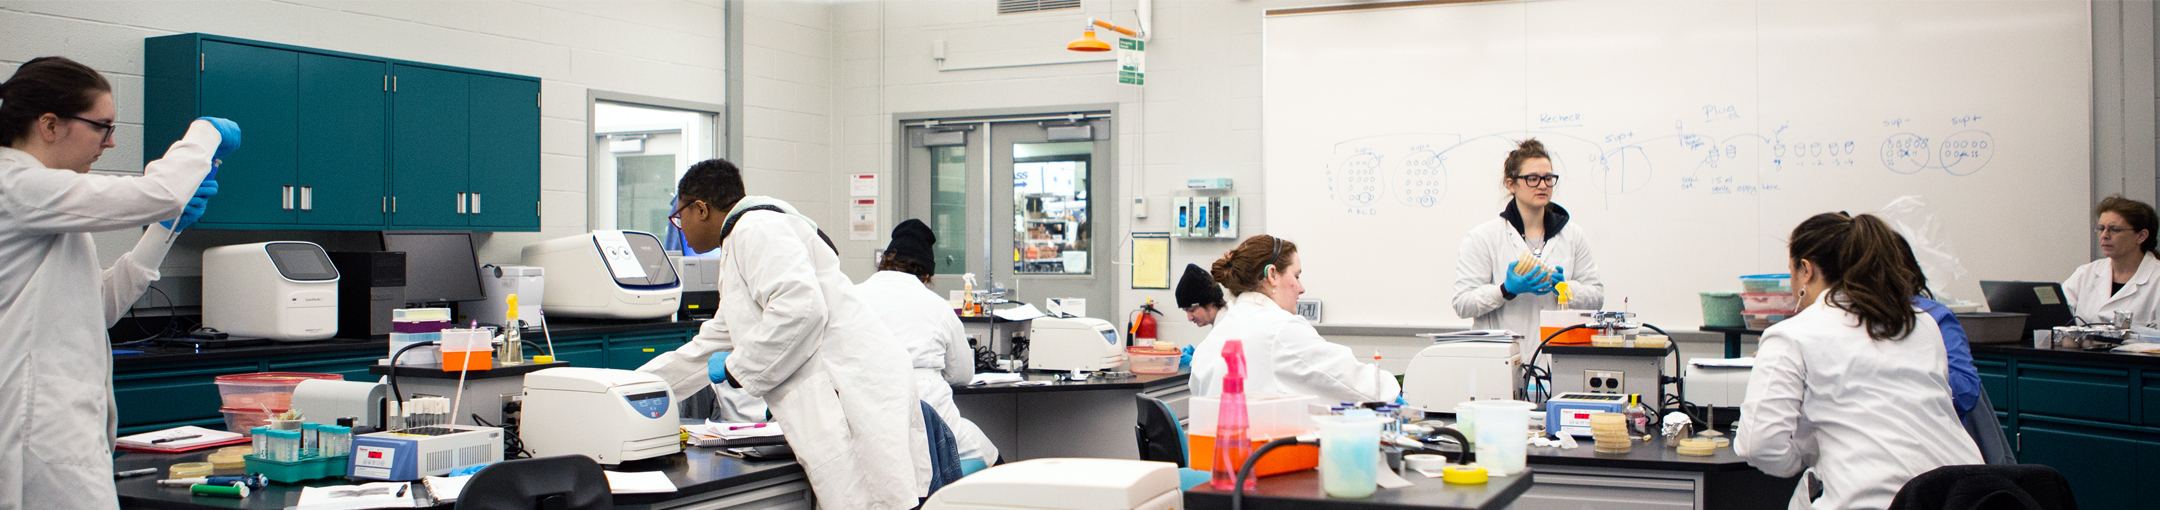 students working in genomics lab during class